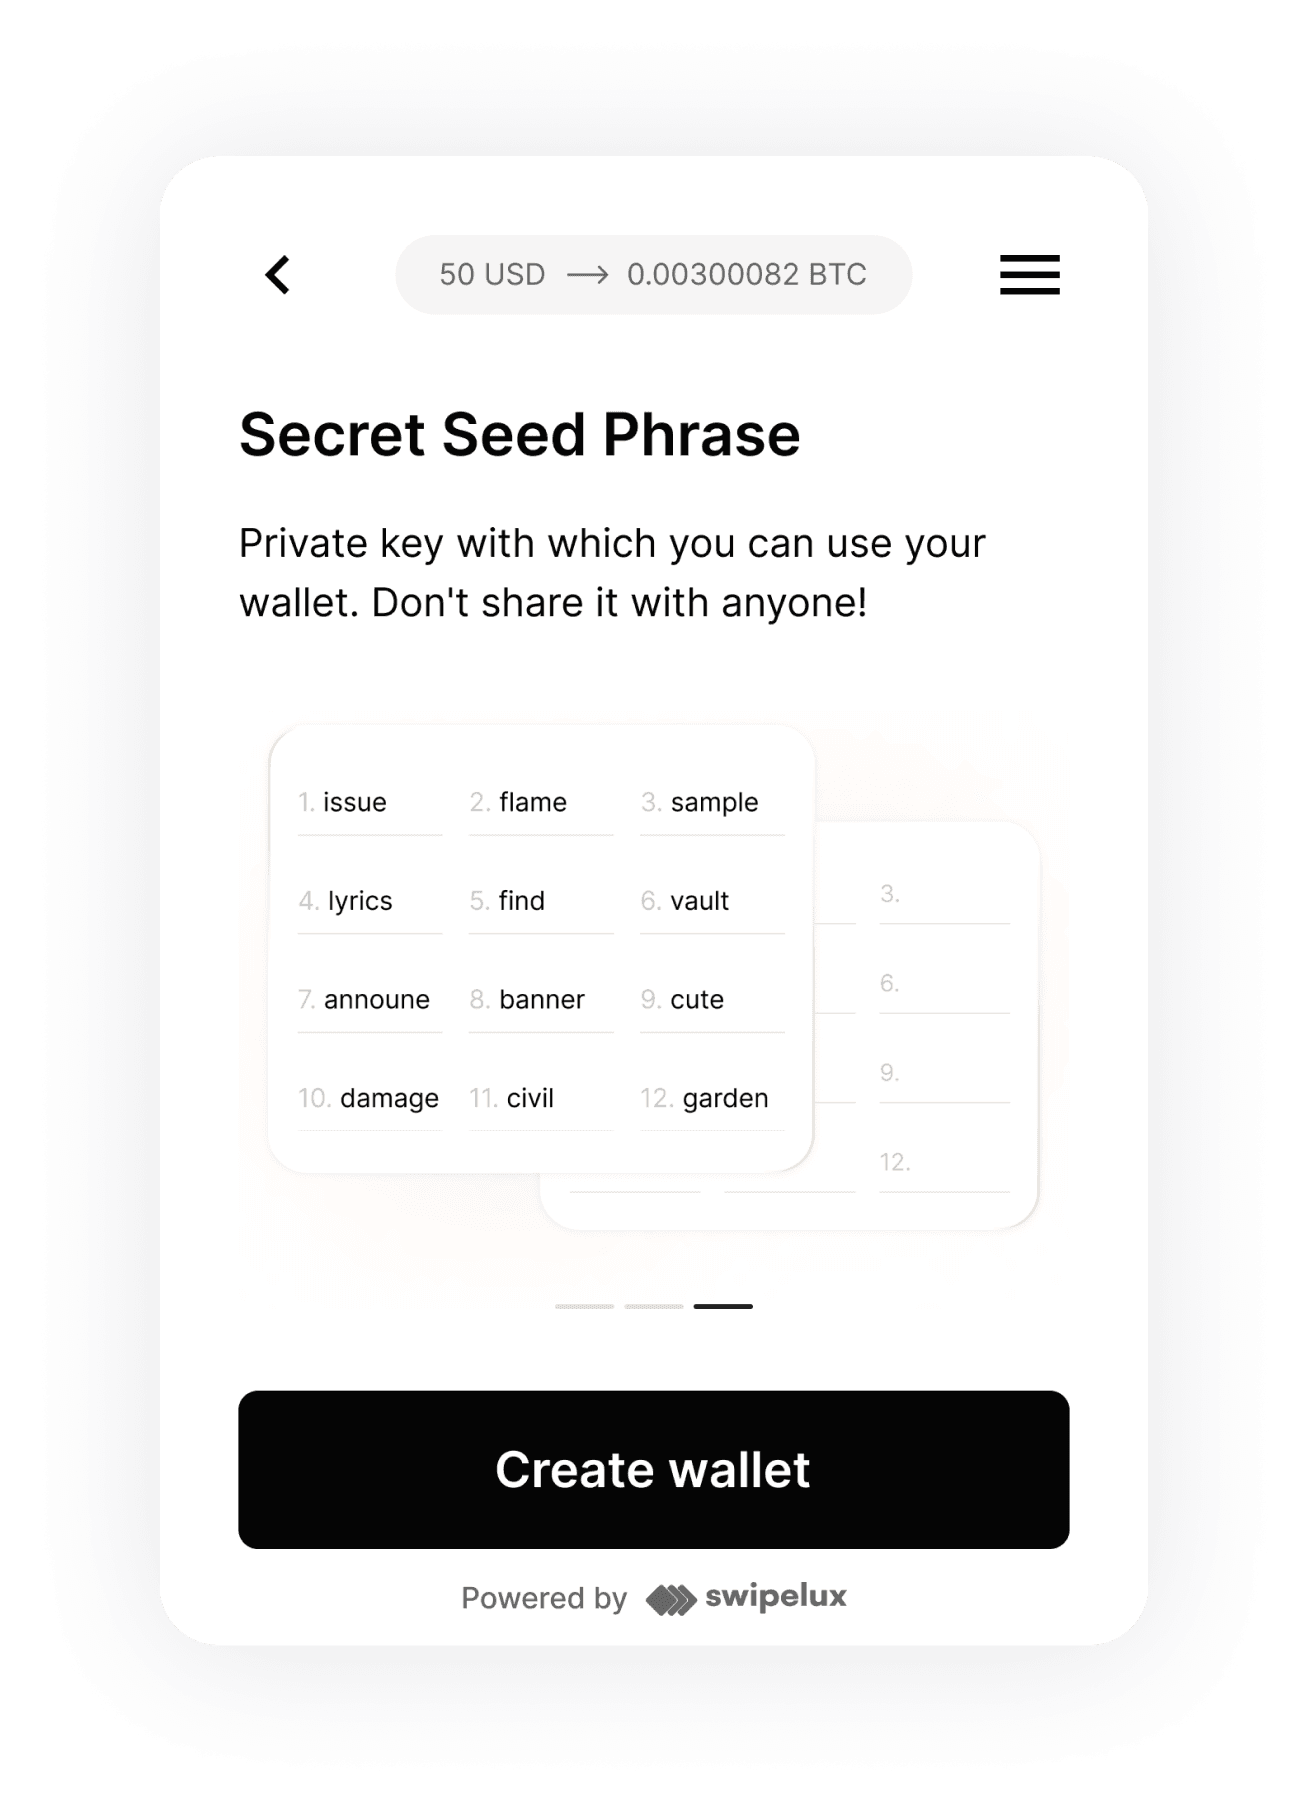 to create a wallet you need to take only three steps in ours widget